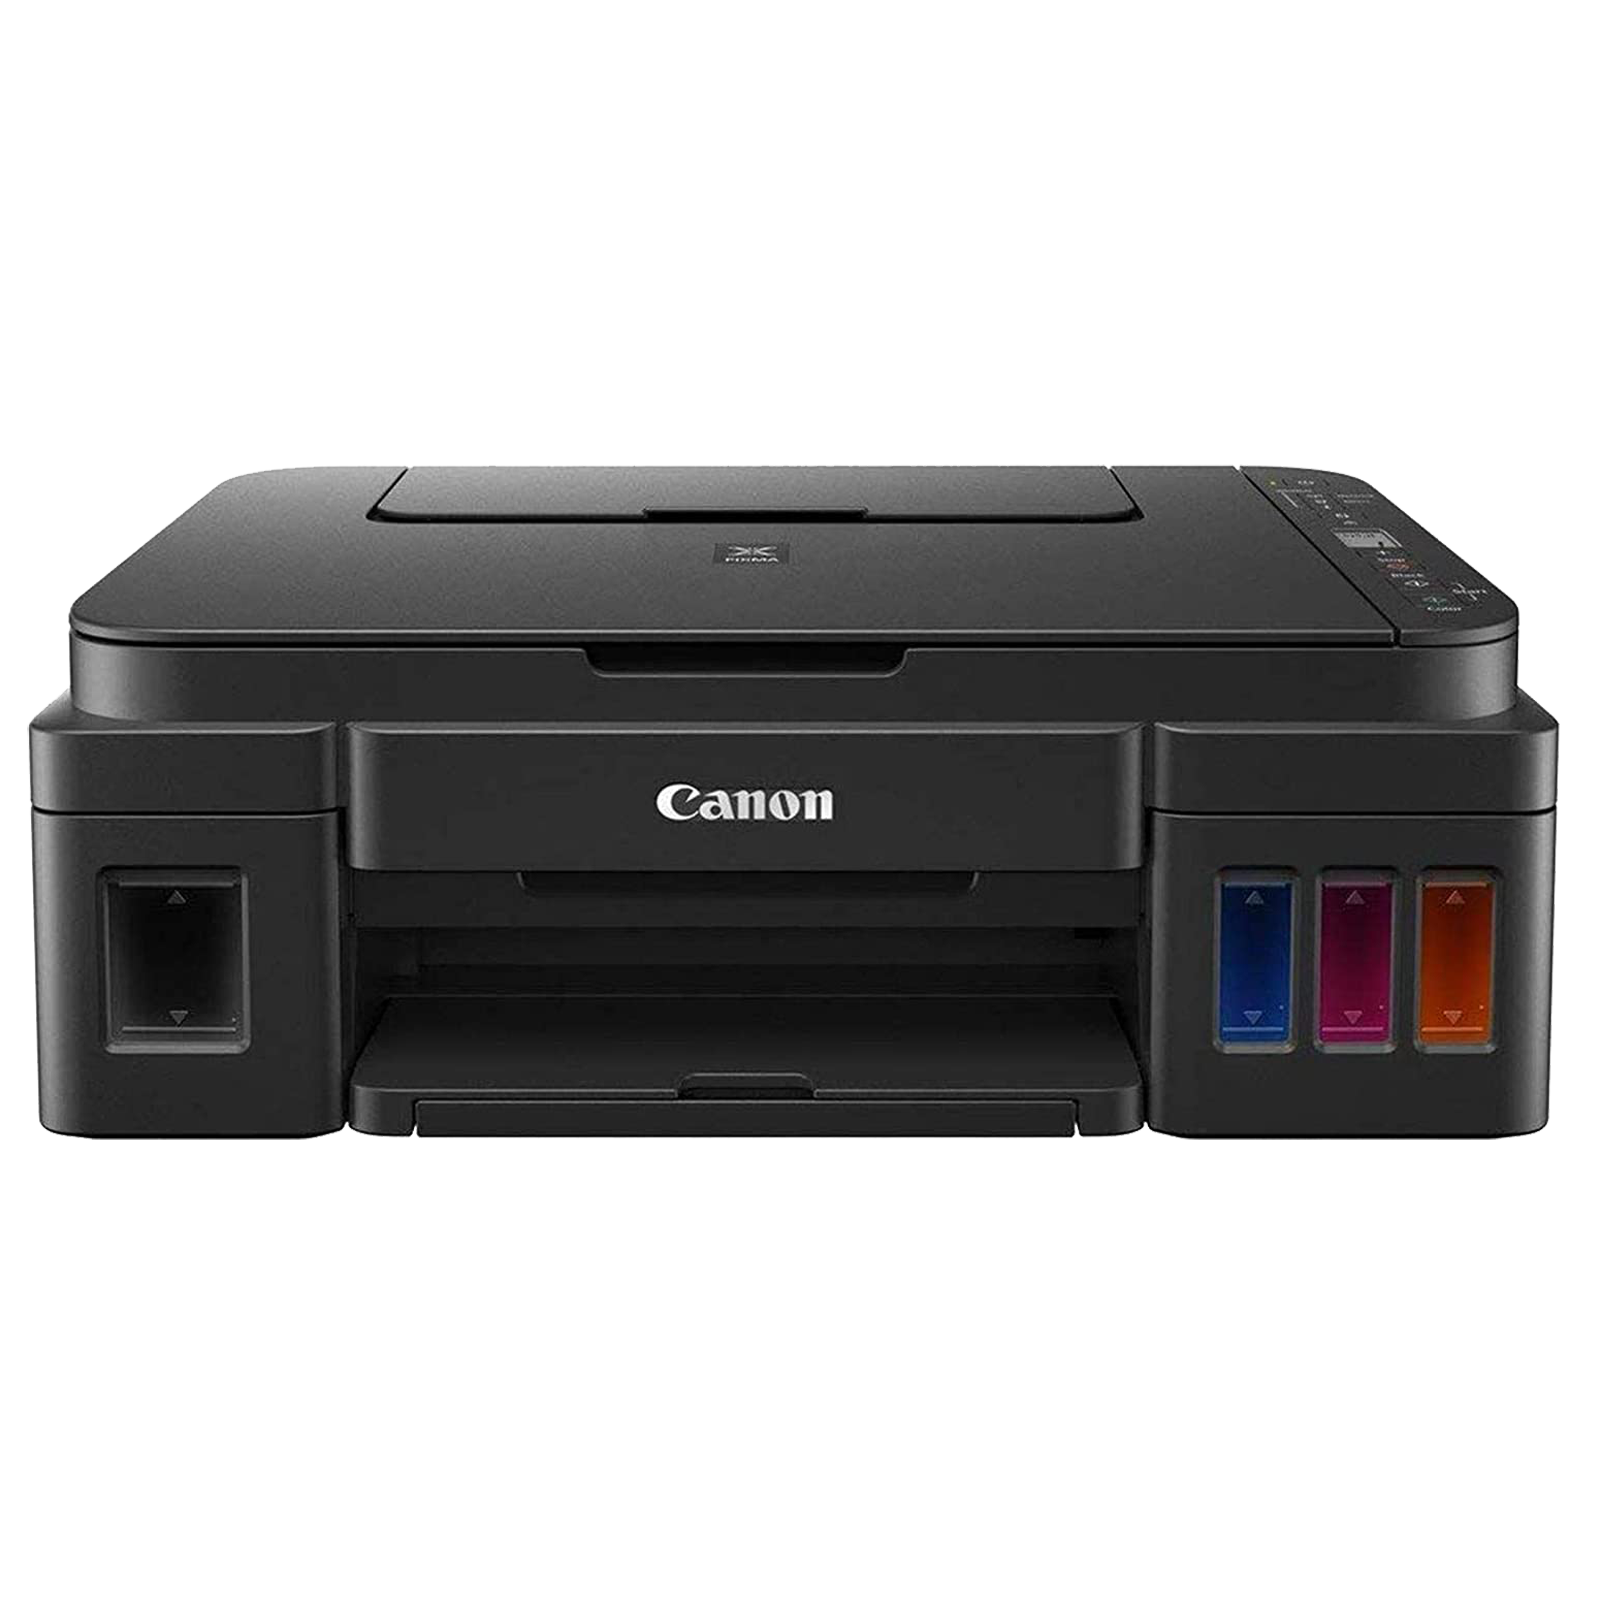 Canon Pixma G3010 Wireless Color All-in-One Ink Tank Printer (4800 x 1200 dpi Printing Resolution, 2315C018AF, Black)